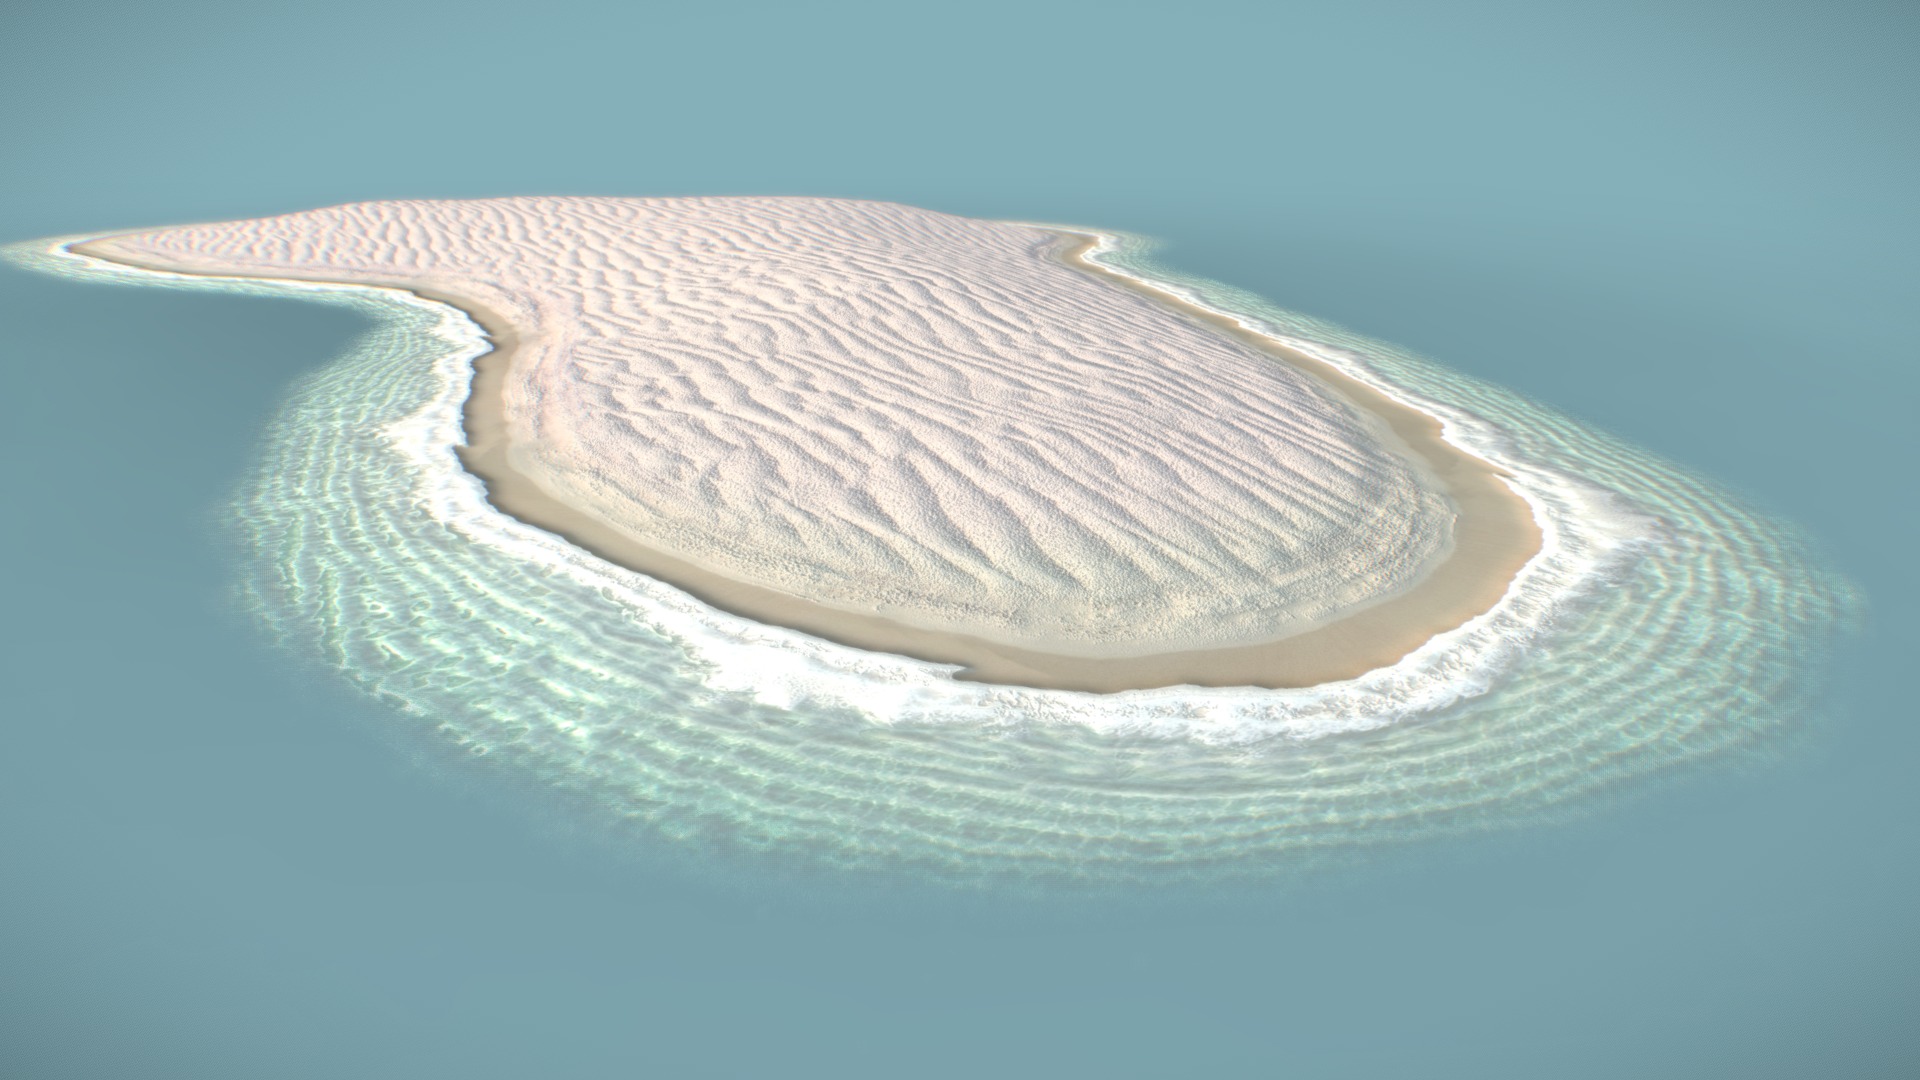 3D model Tiny island - This is a 3D model of the Tiny island. The 3D model is about a close-up of a seashell.